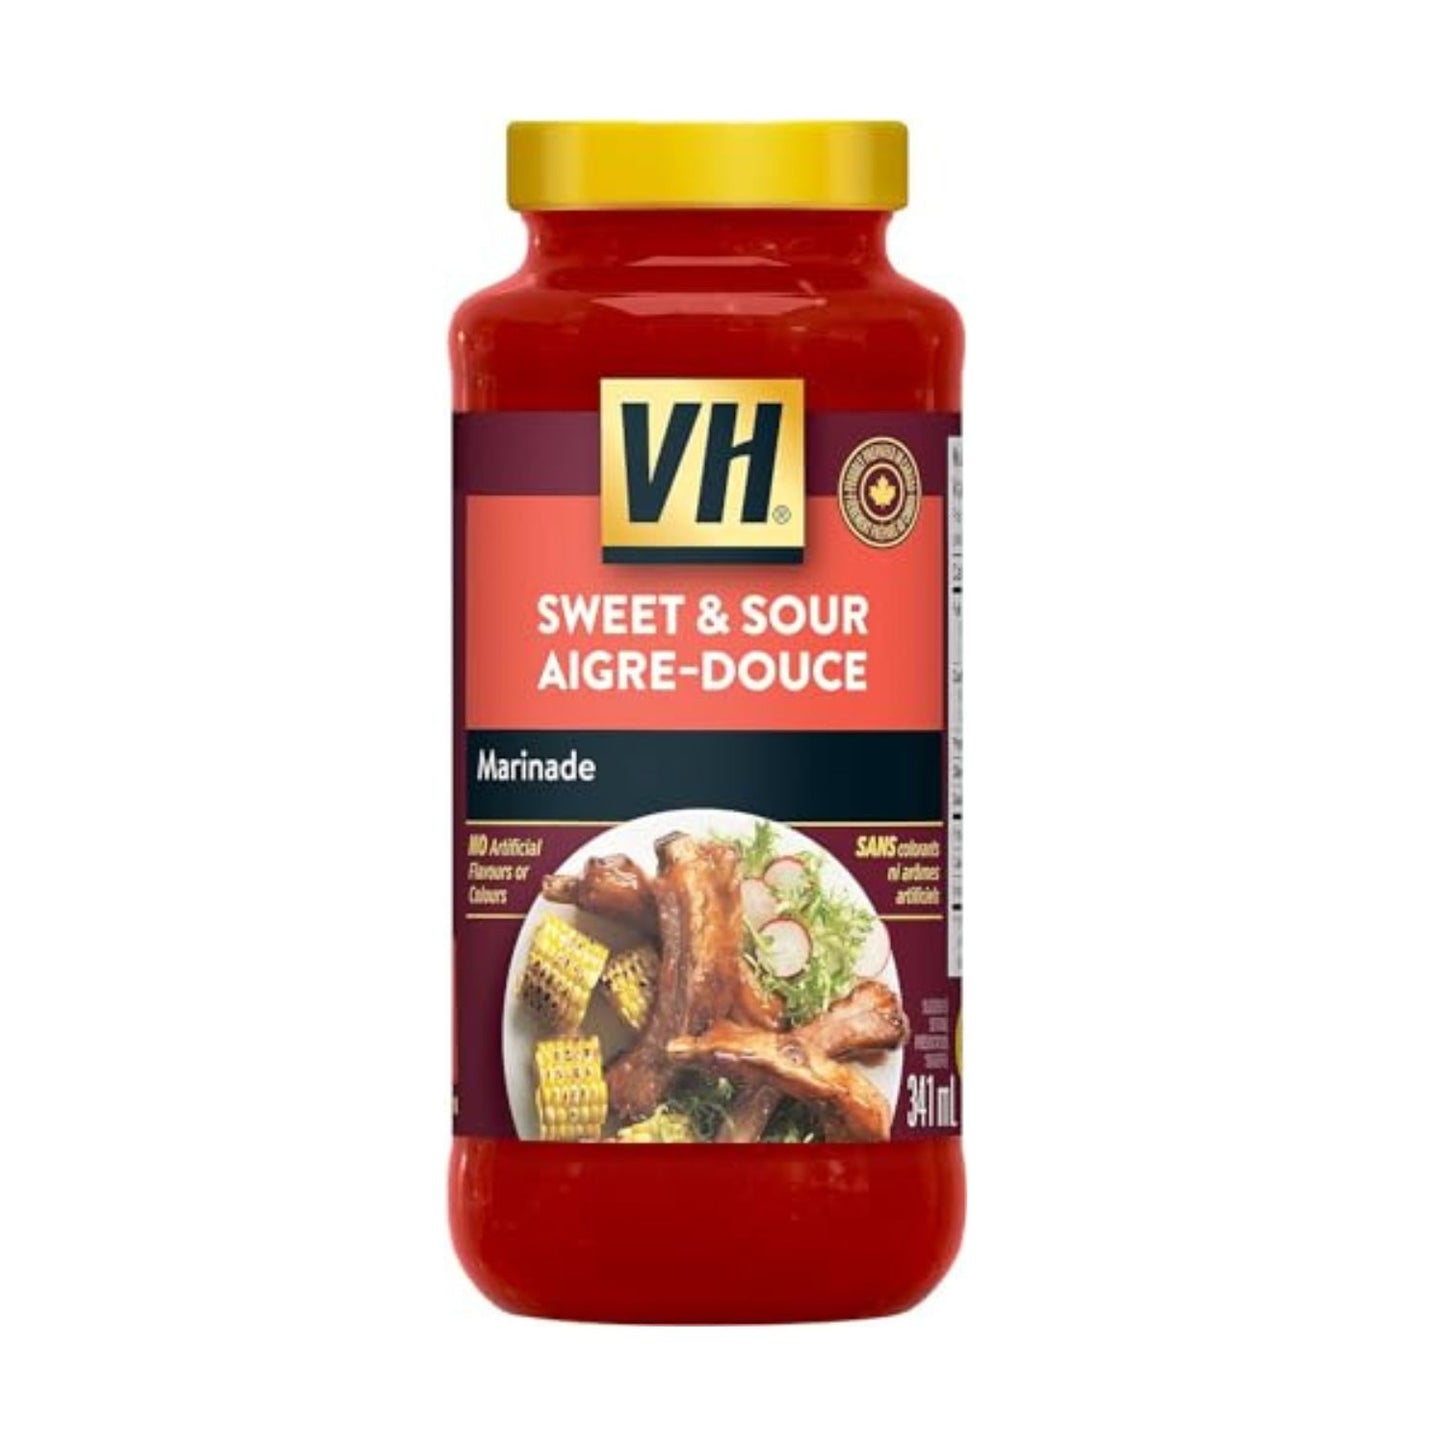 VH Marinade - Sweet & Sour Cooking Sauce Bottle, 341ml/11.5 fl. oz (Shipped from Canada)